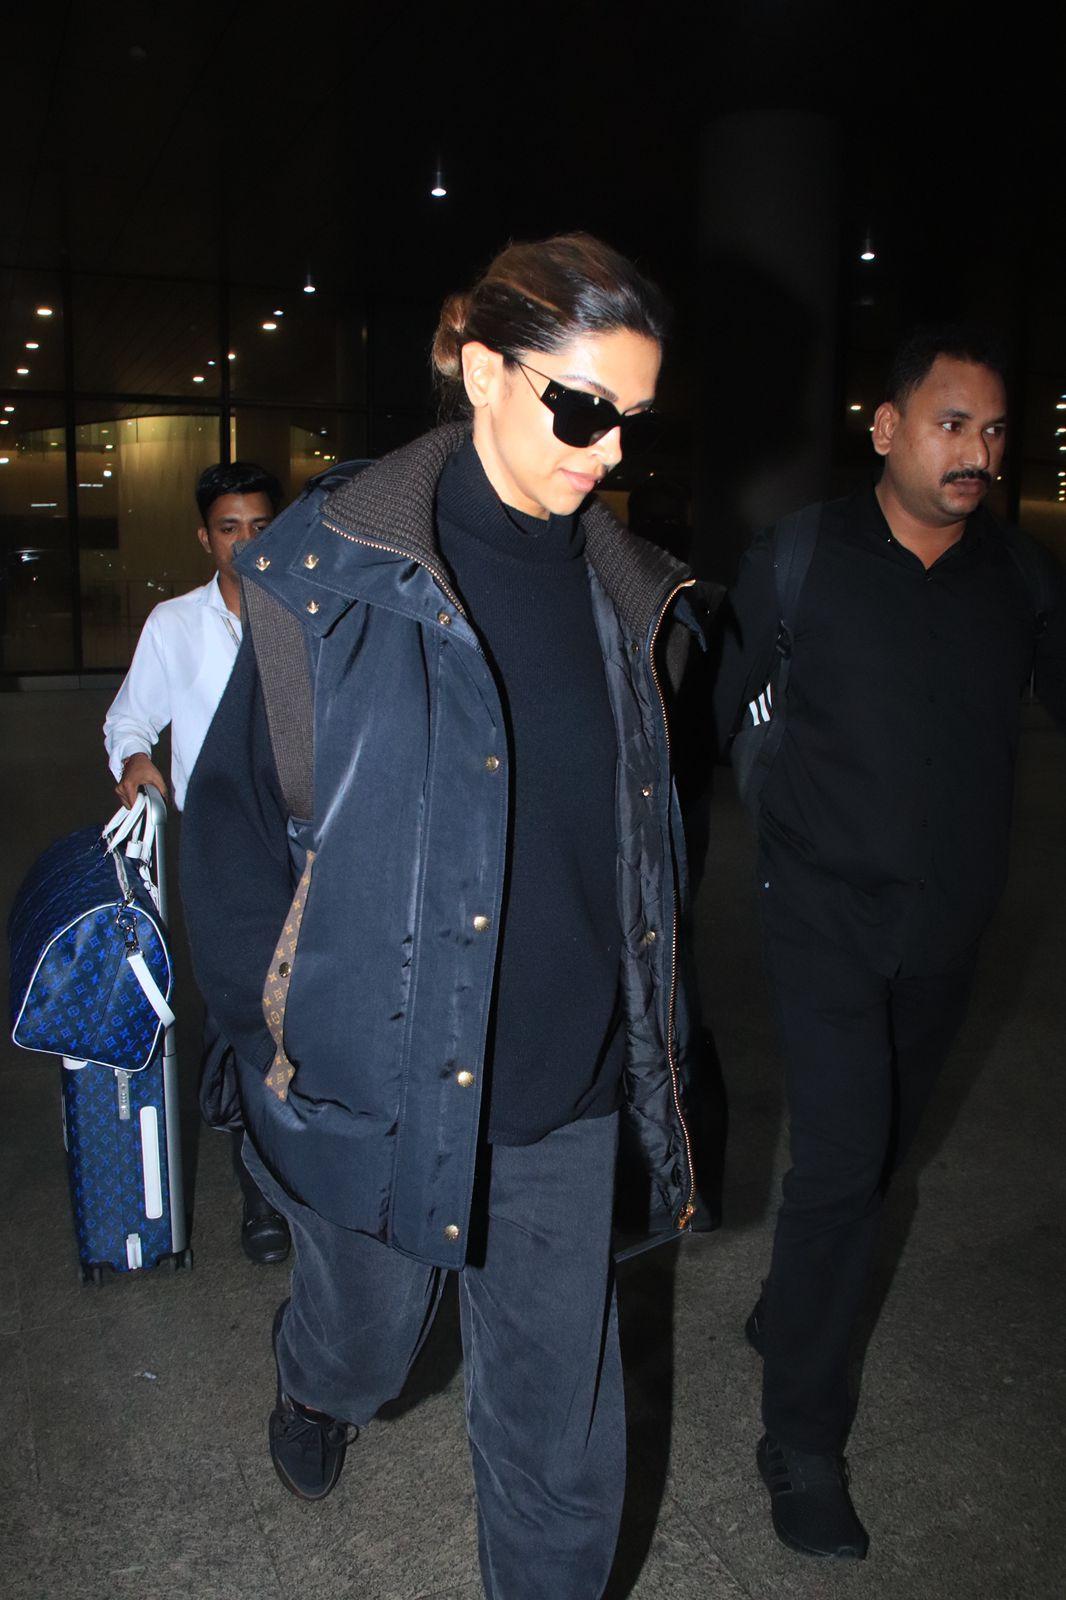 Deepika Padukone, who will soon be seen next to Hrithik Roshan in 'Fighter', was spotted at the Mumbai Airport in the early hours of the morning